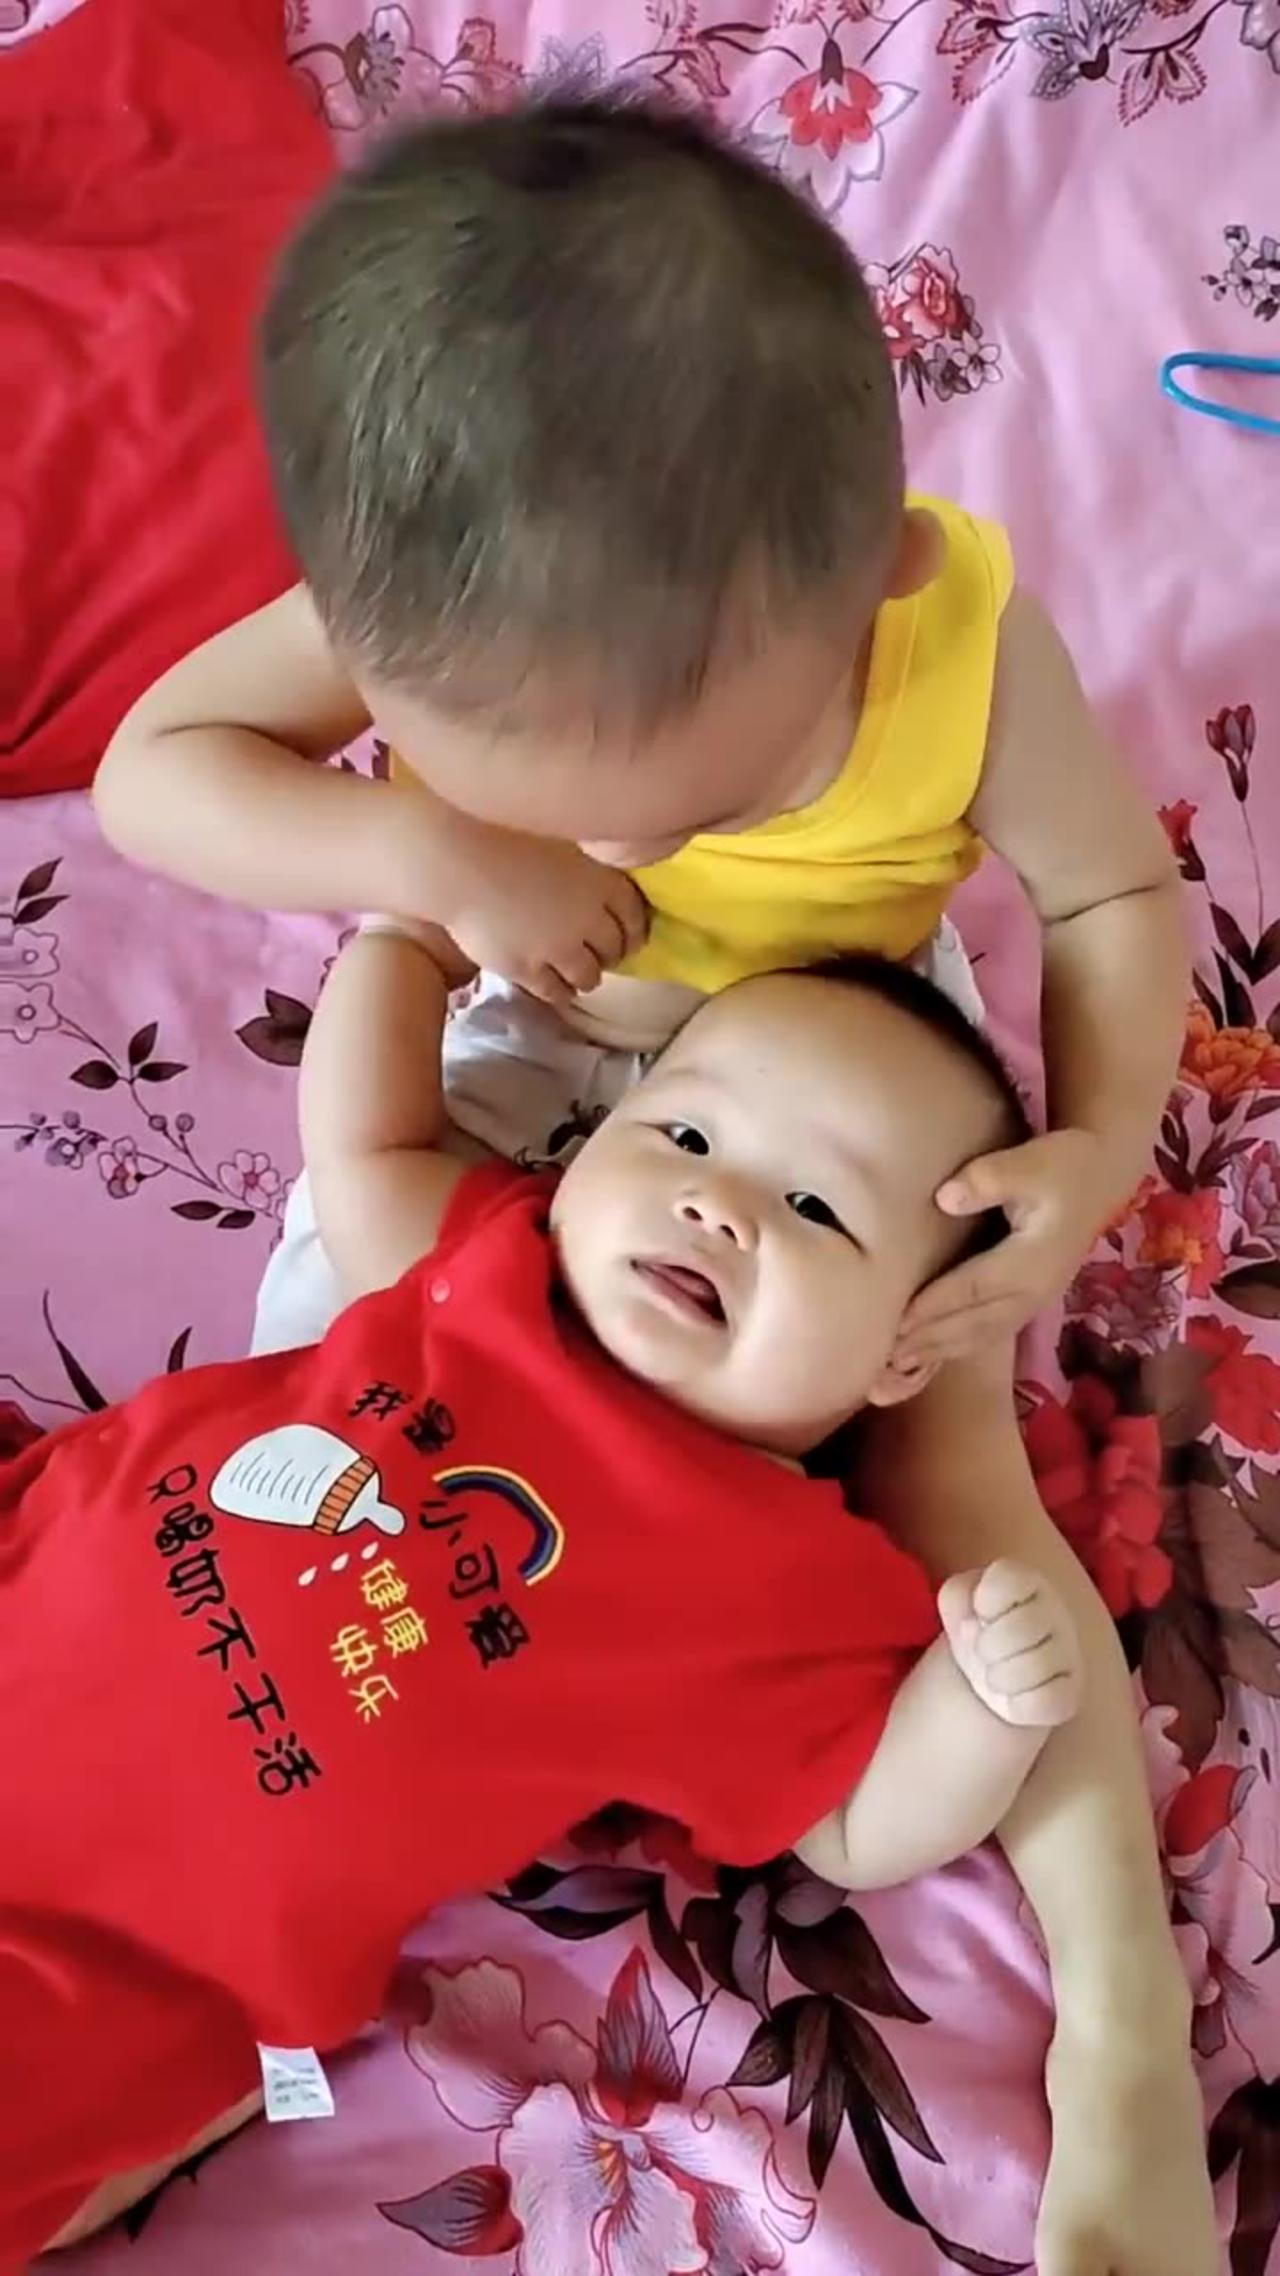 Cute baby Videos - Moment of the Lovely Baby - Cutest baby On Earth #love